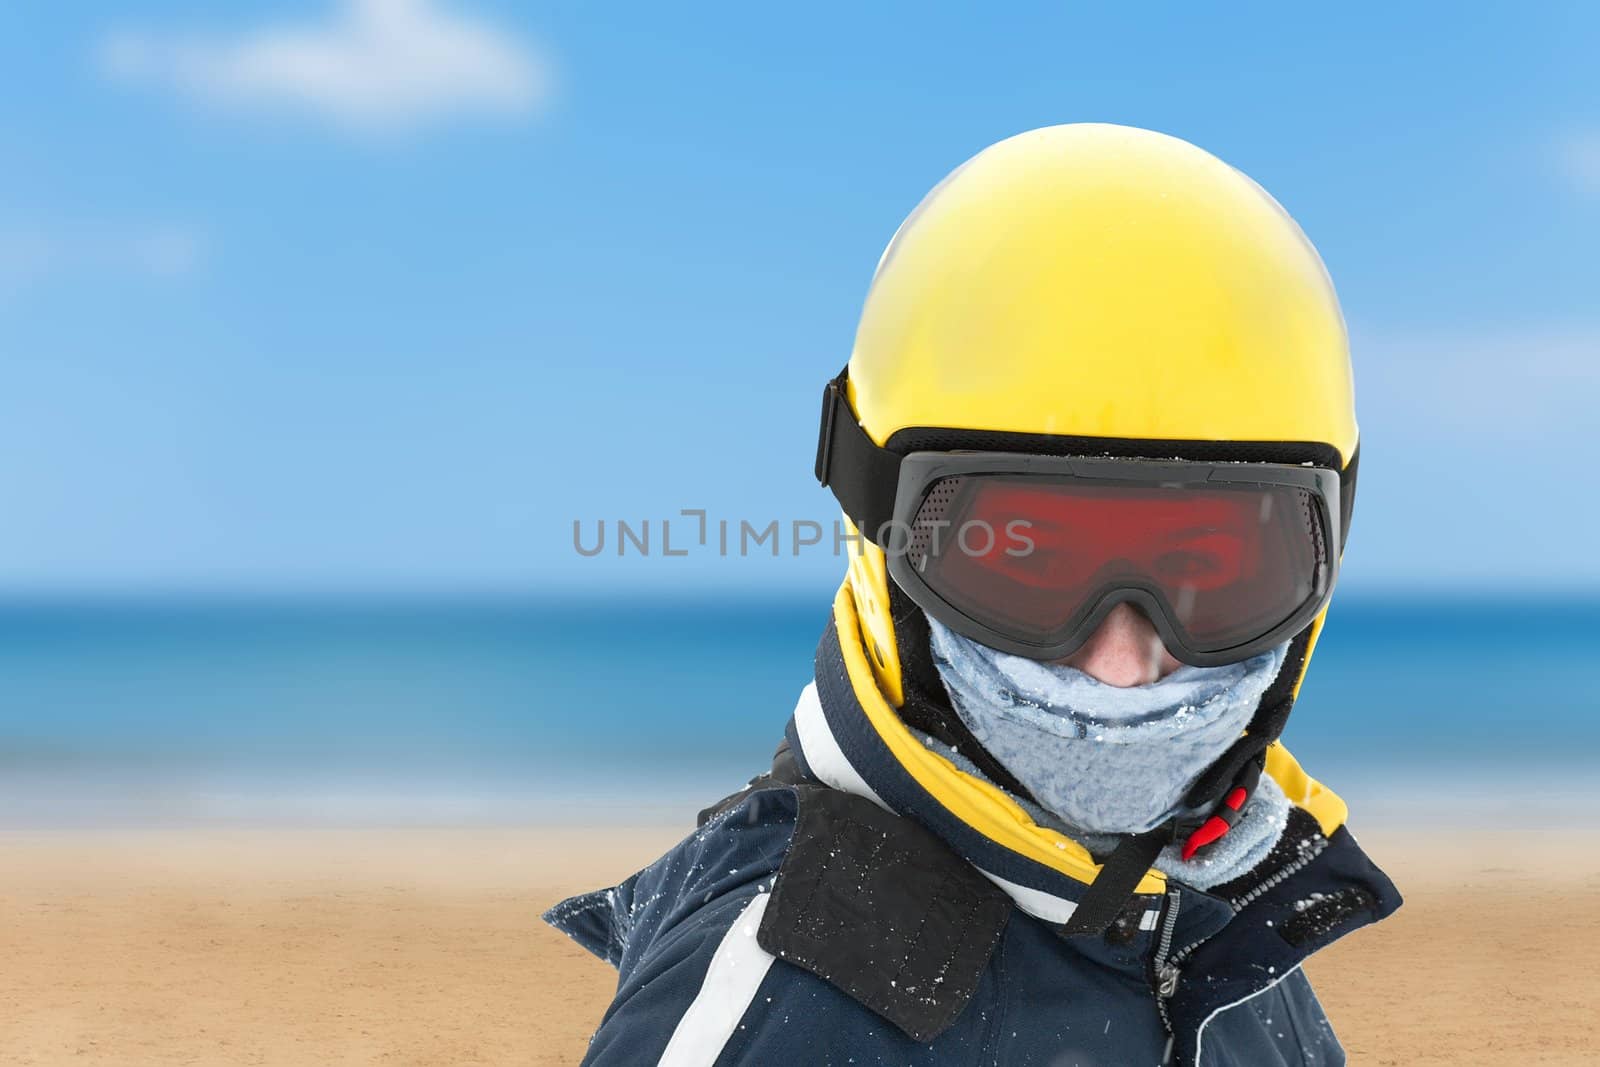 Girl in skiing outfit against summer beach